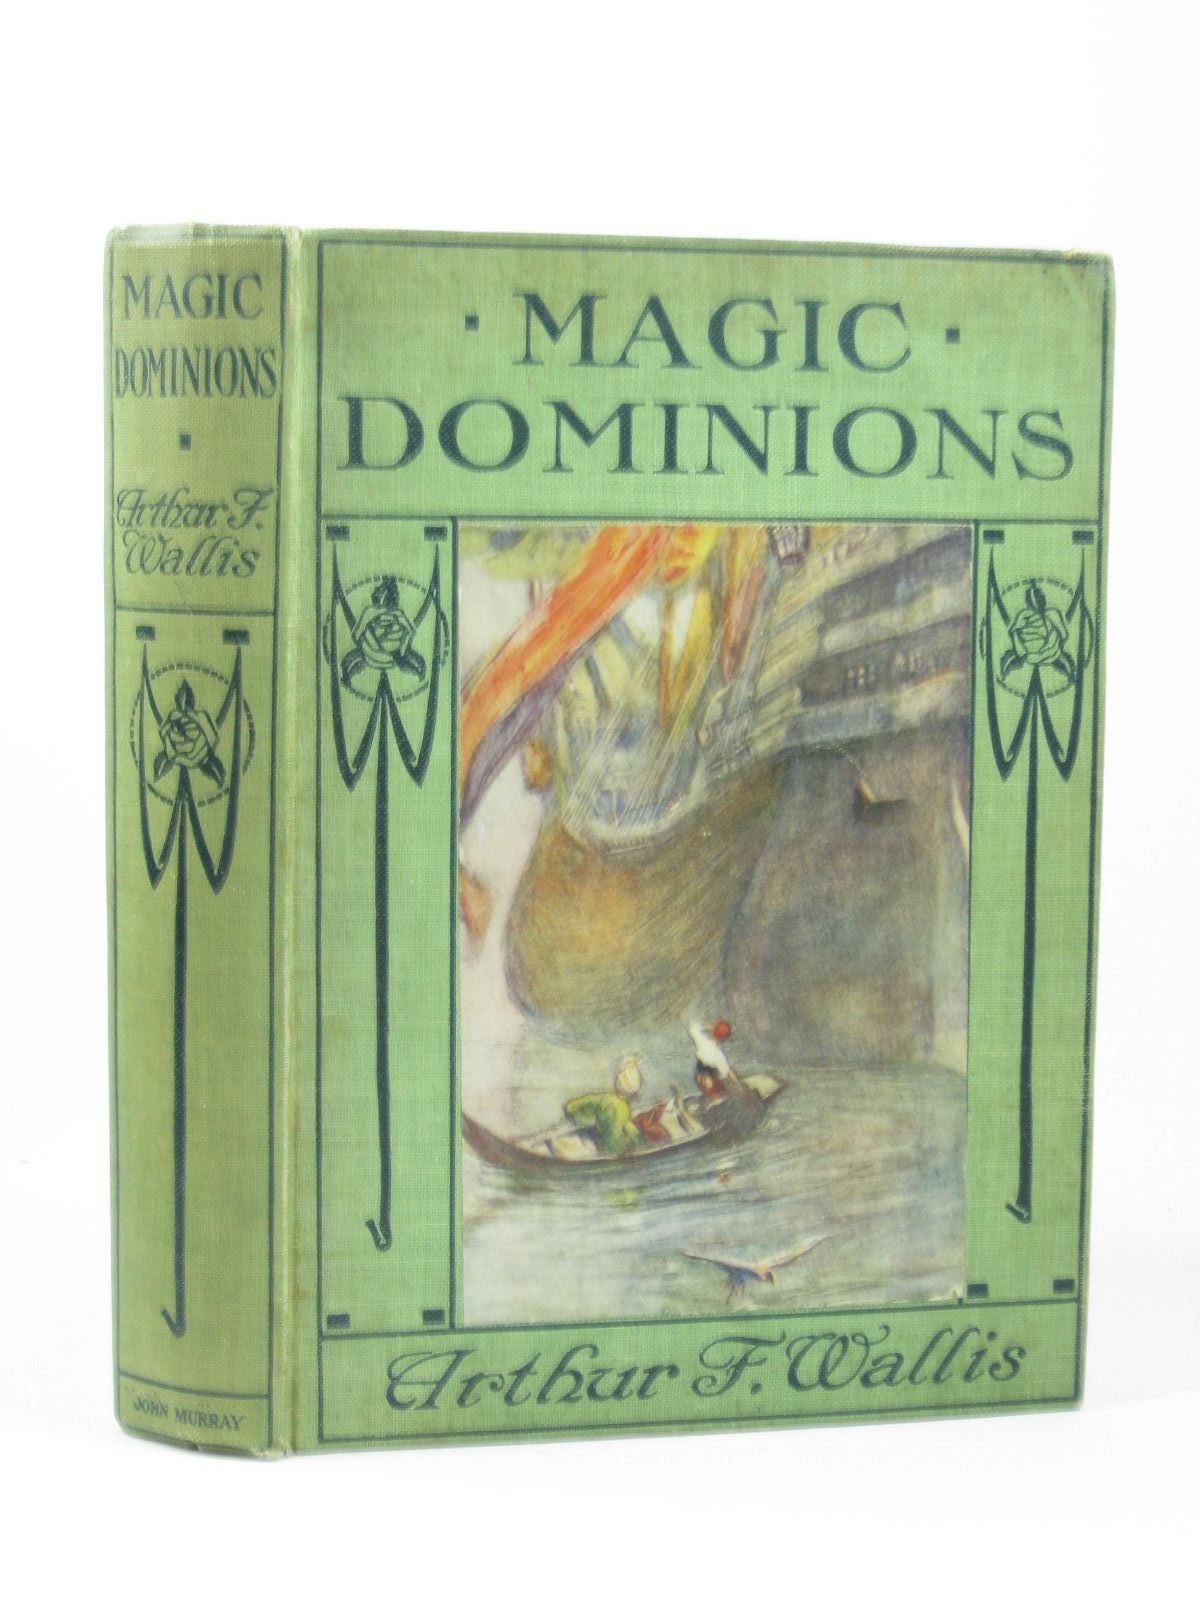 Cover of MAGIC DOMINIONS by Arthur F. Wallis